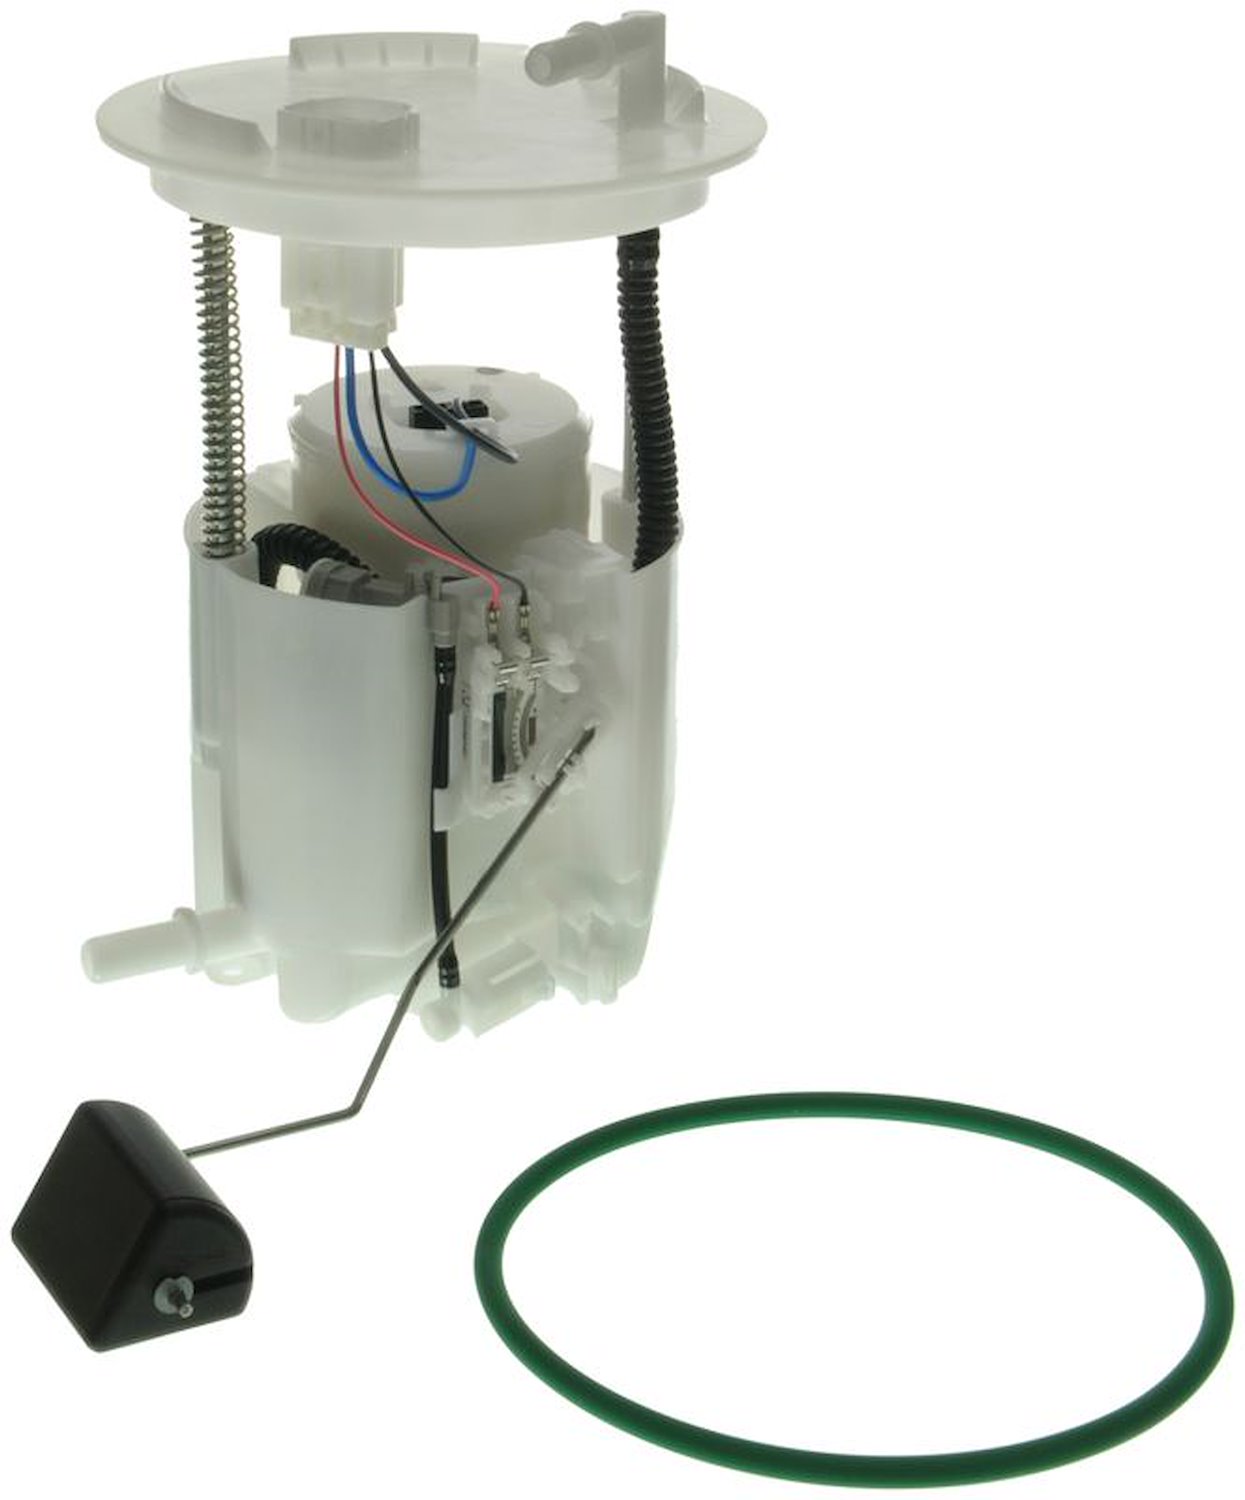 OE Ford Replacement Fuel Pump Module Assembly for 2007-2010 Ford Edge/Lincoln MKX